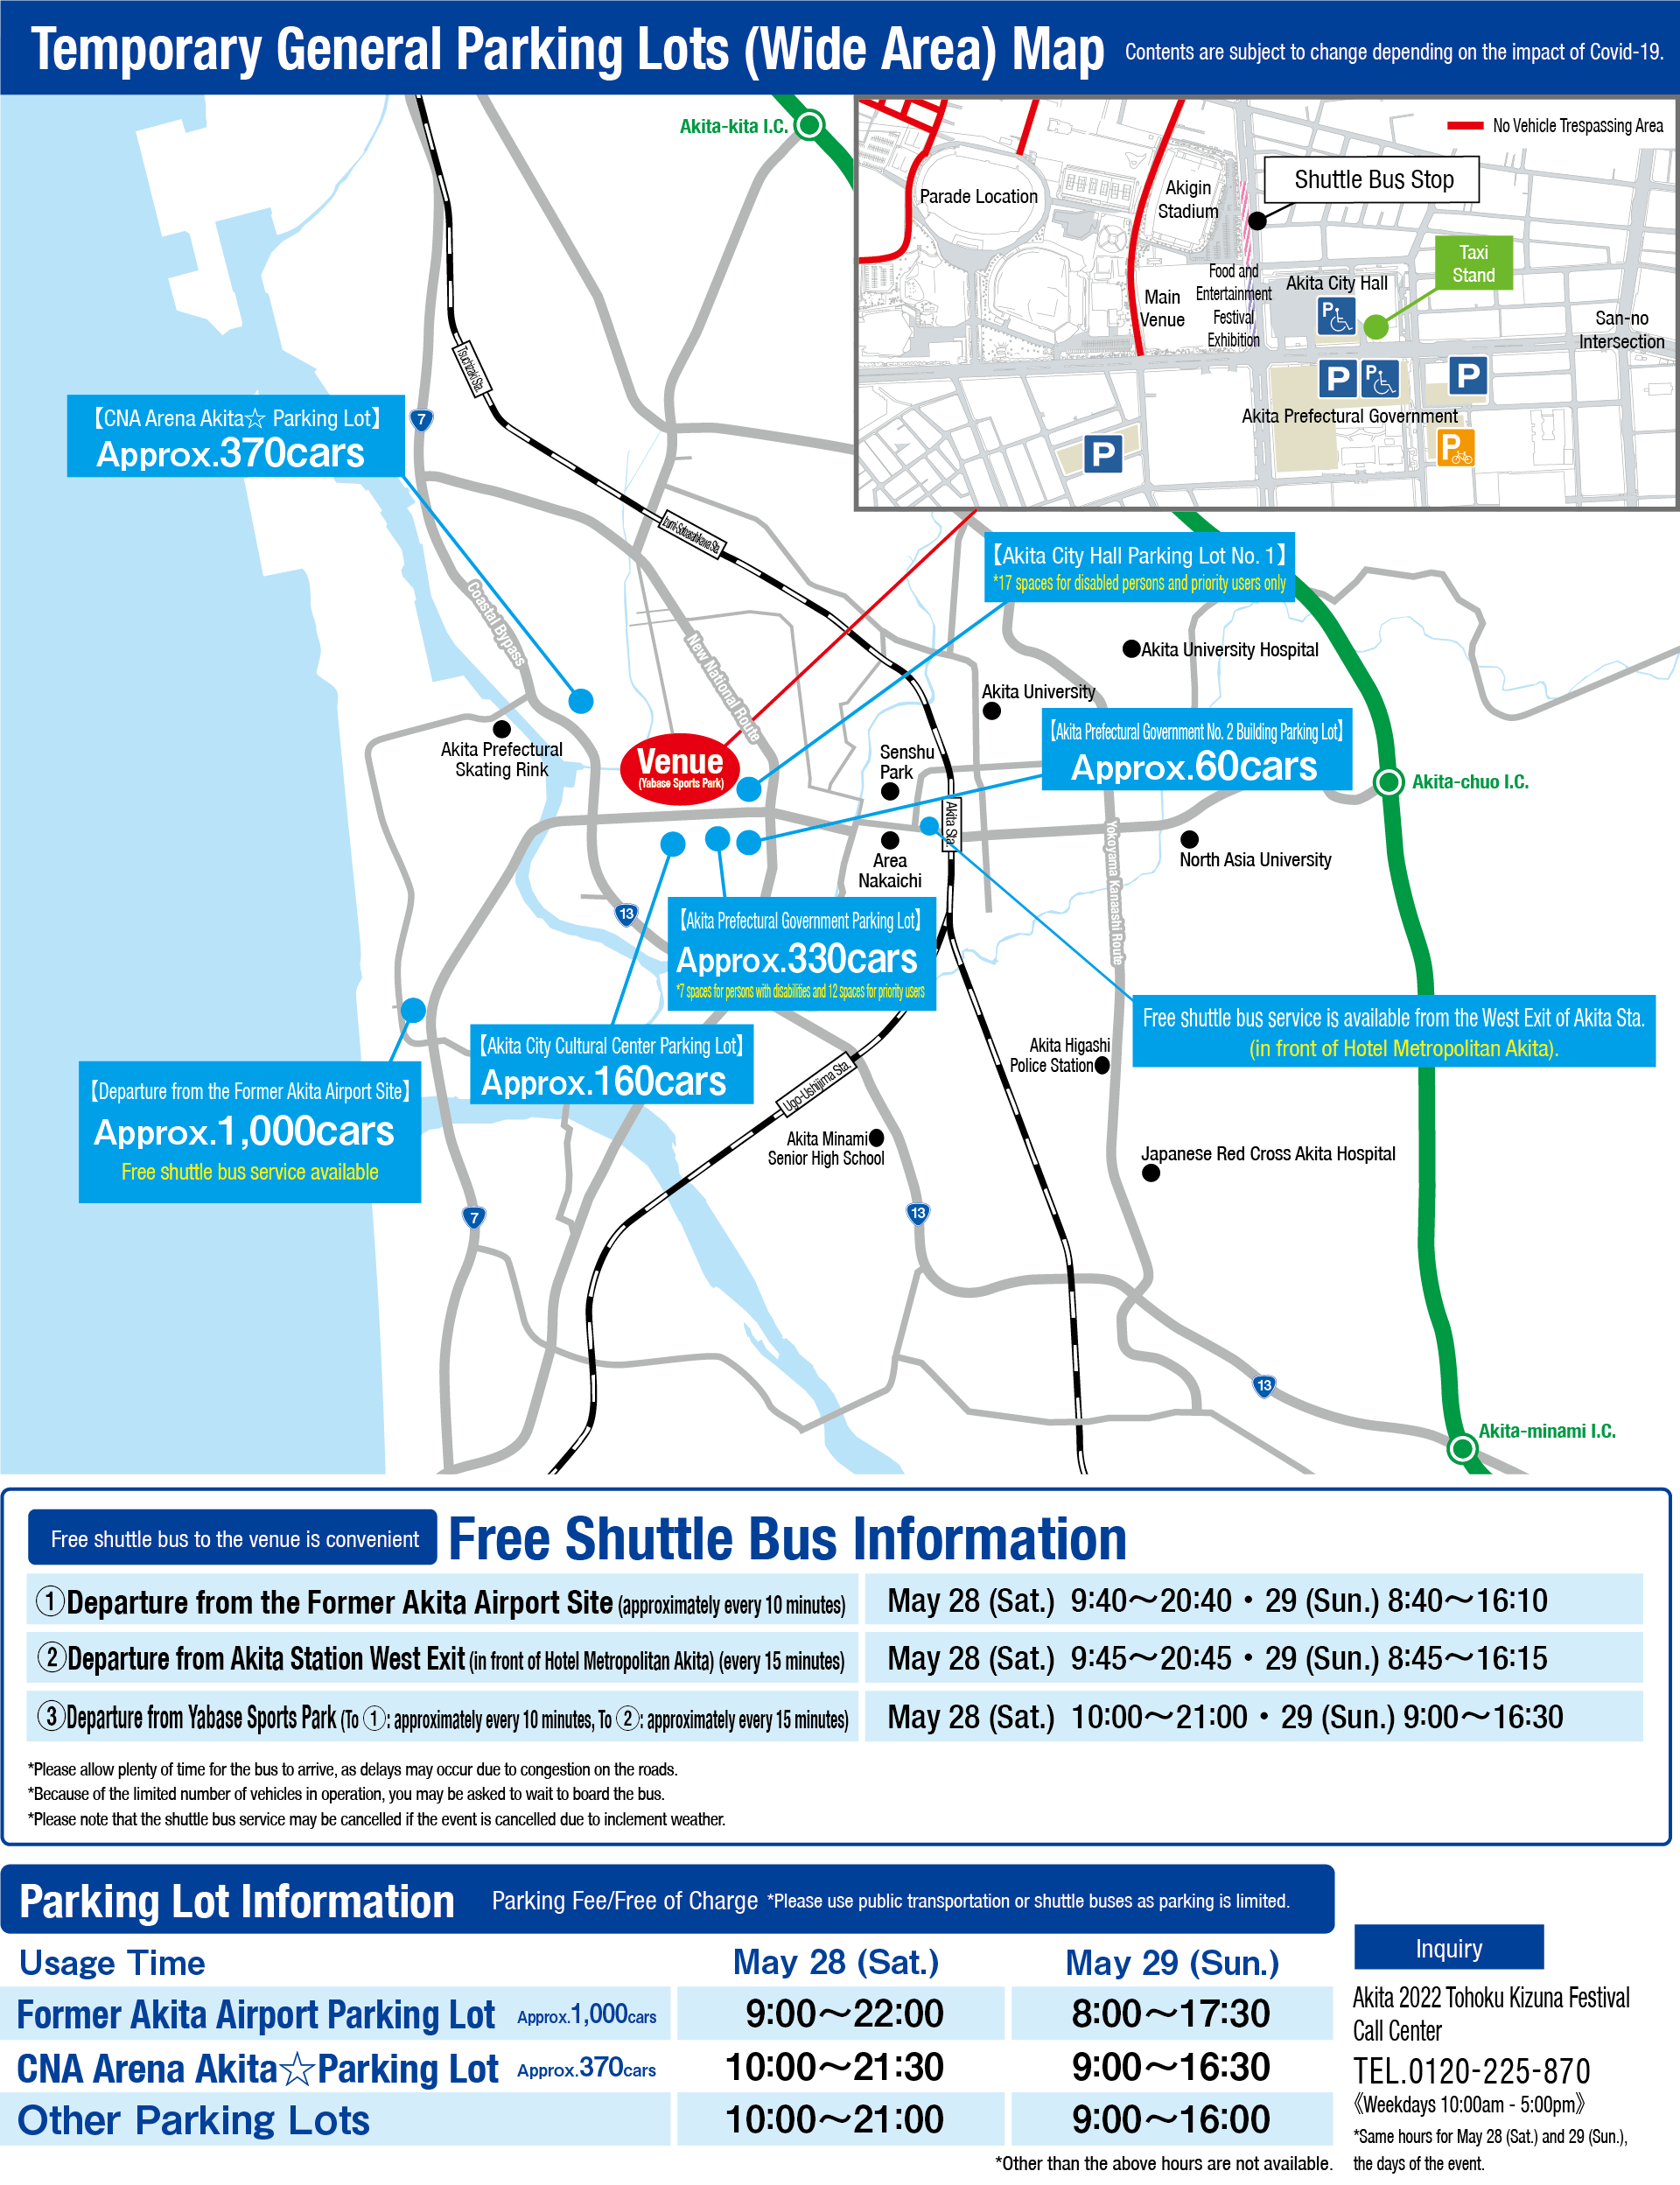 Parking Lots and Shuttle Bus Service